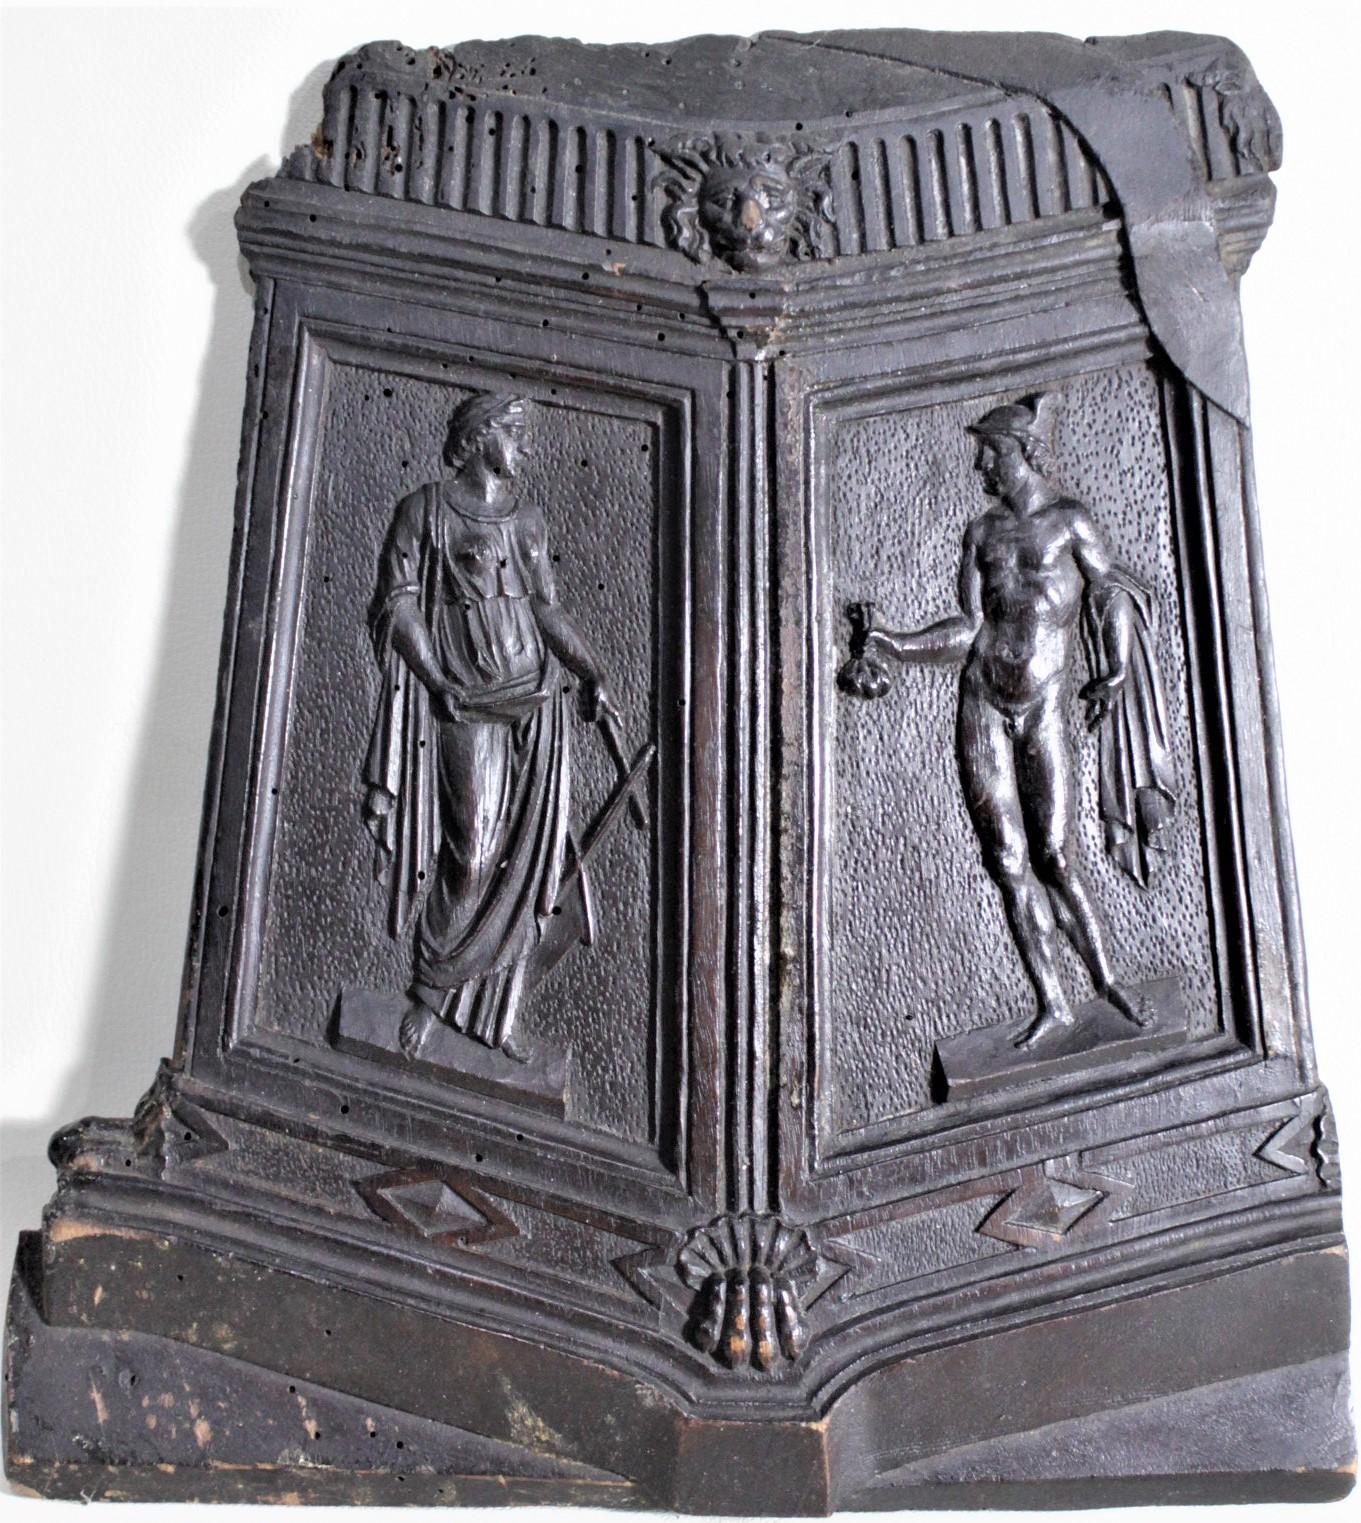 Hand-Carved Set of 4 Antique Carved Wooden Panels or Wall Plaques with Neoclassical Figures